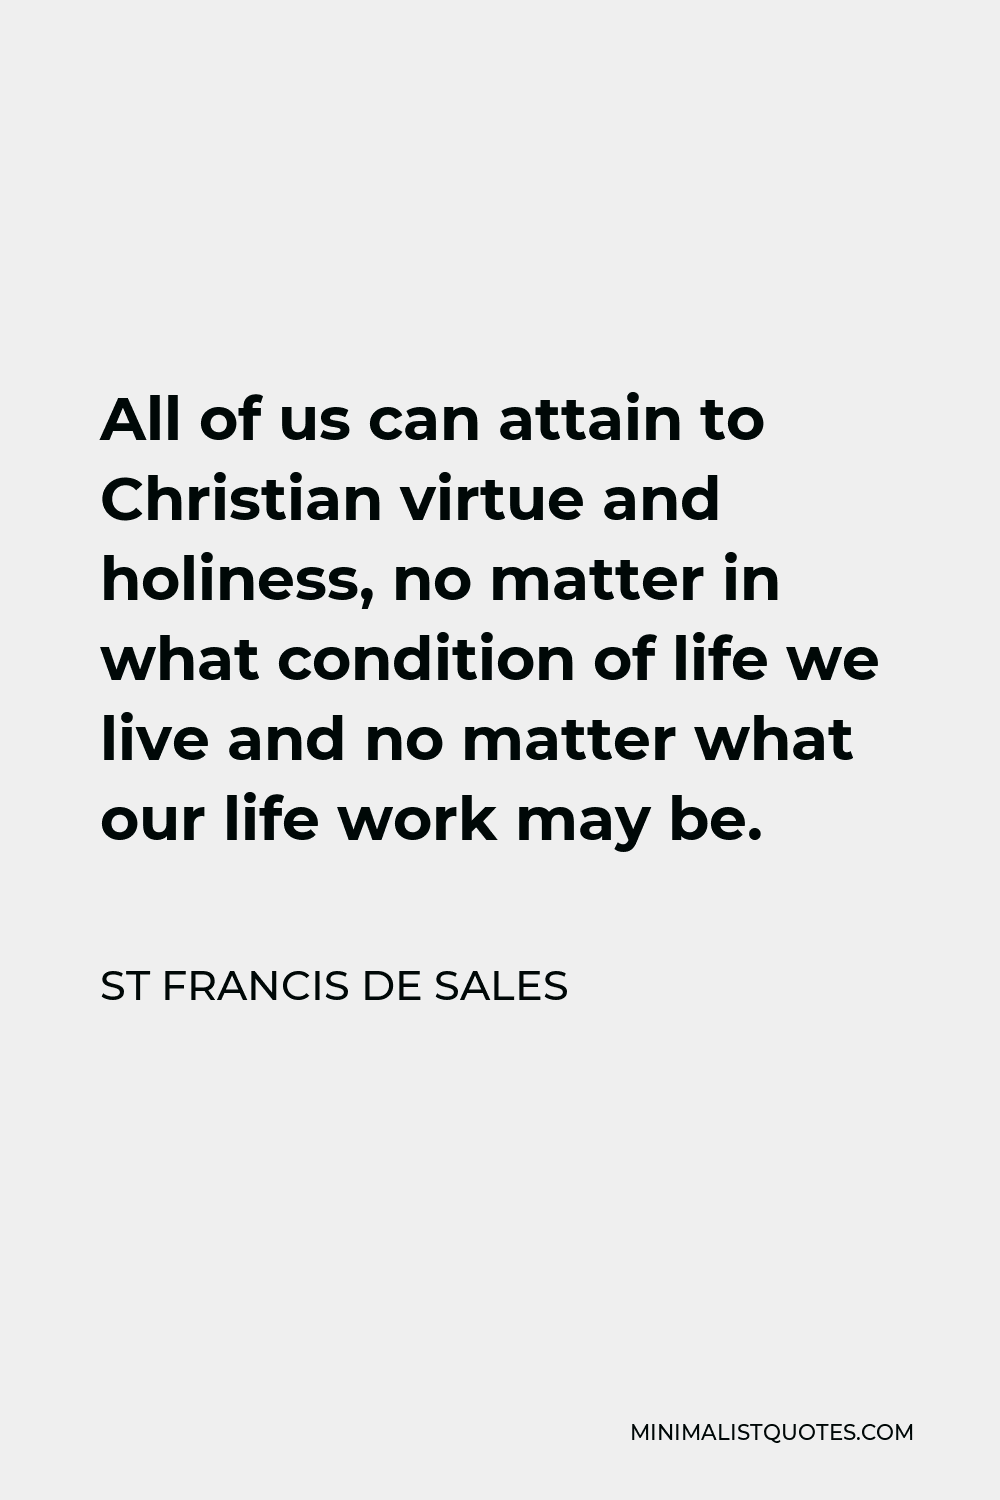 St Francis De Sales Quote - All of us can attain to Christian virtue and holiness, no matter in what condition of life we live and no matter what our life work may be.